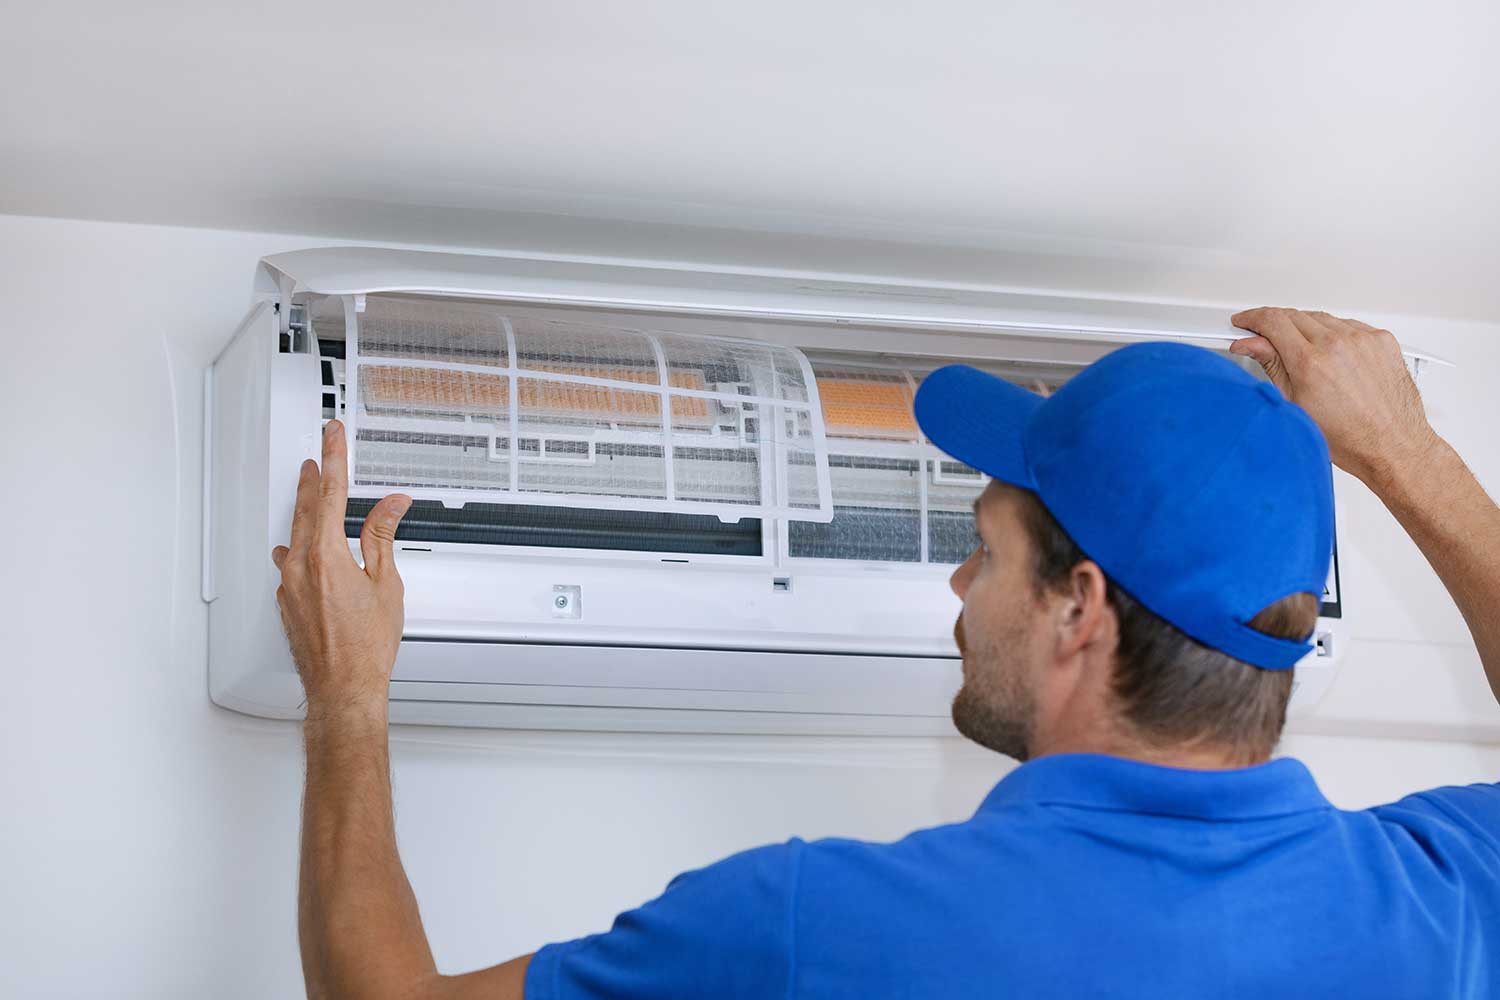 Wanting a modern Heating and Air Conditioning system for my house this Christmas